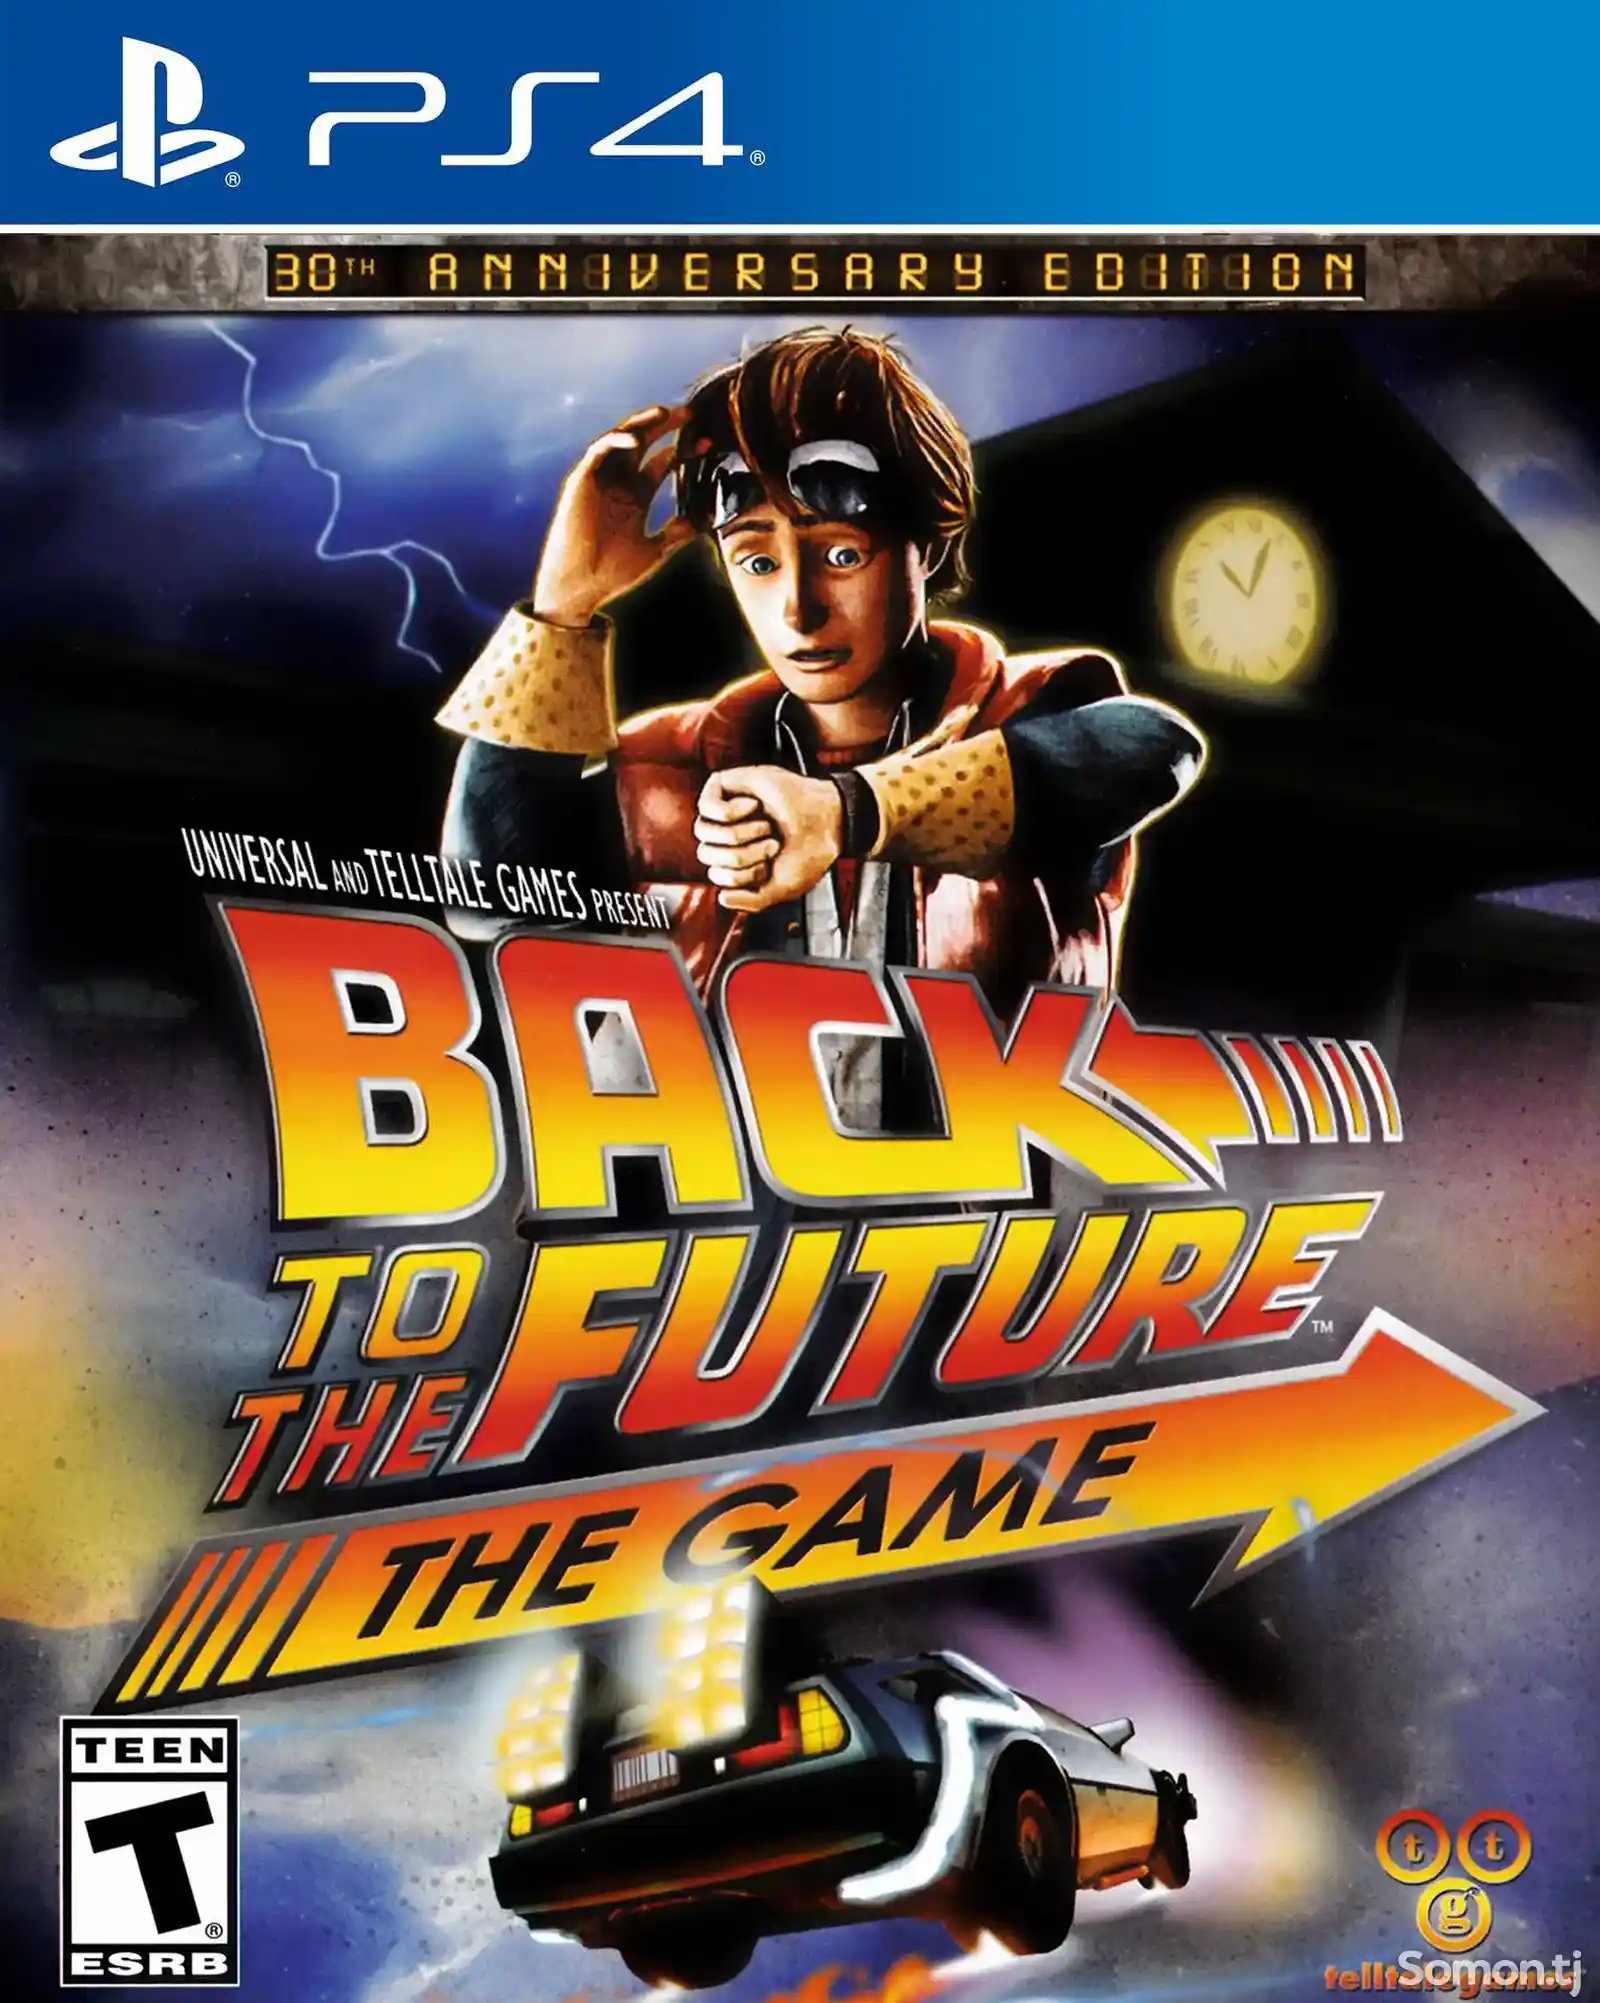 Игра Back tj the future the game для PS-4 / 5.05 / 6.72 / 7.02 / 7.55 / 9.00 /-1